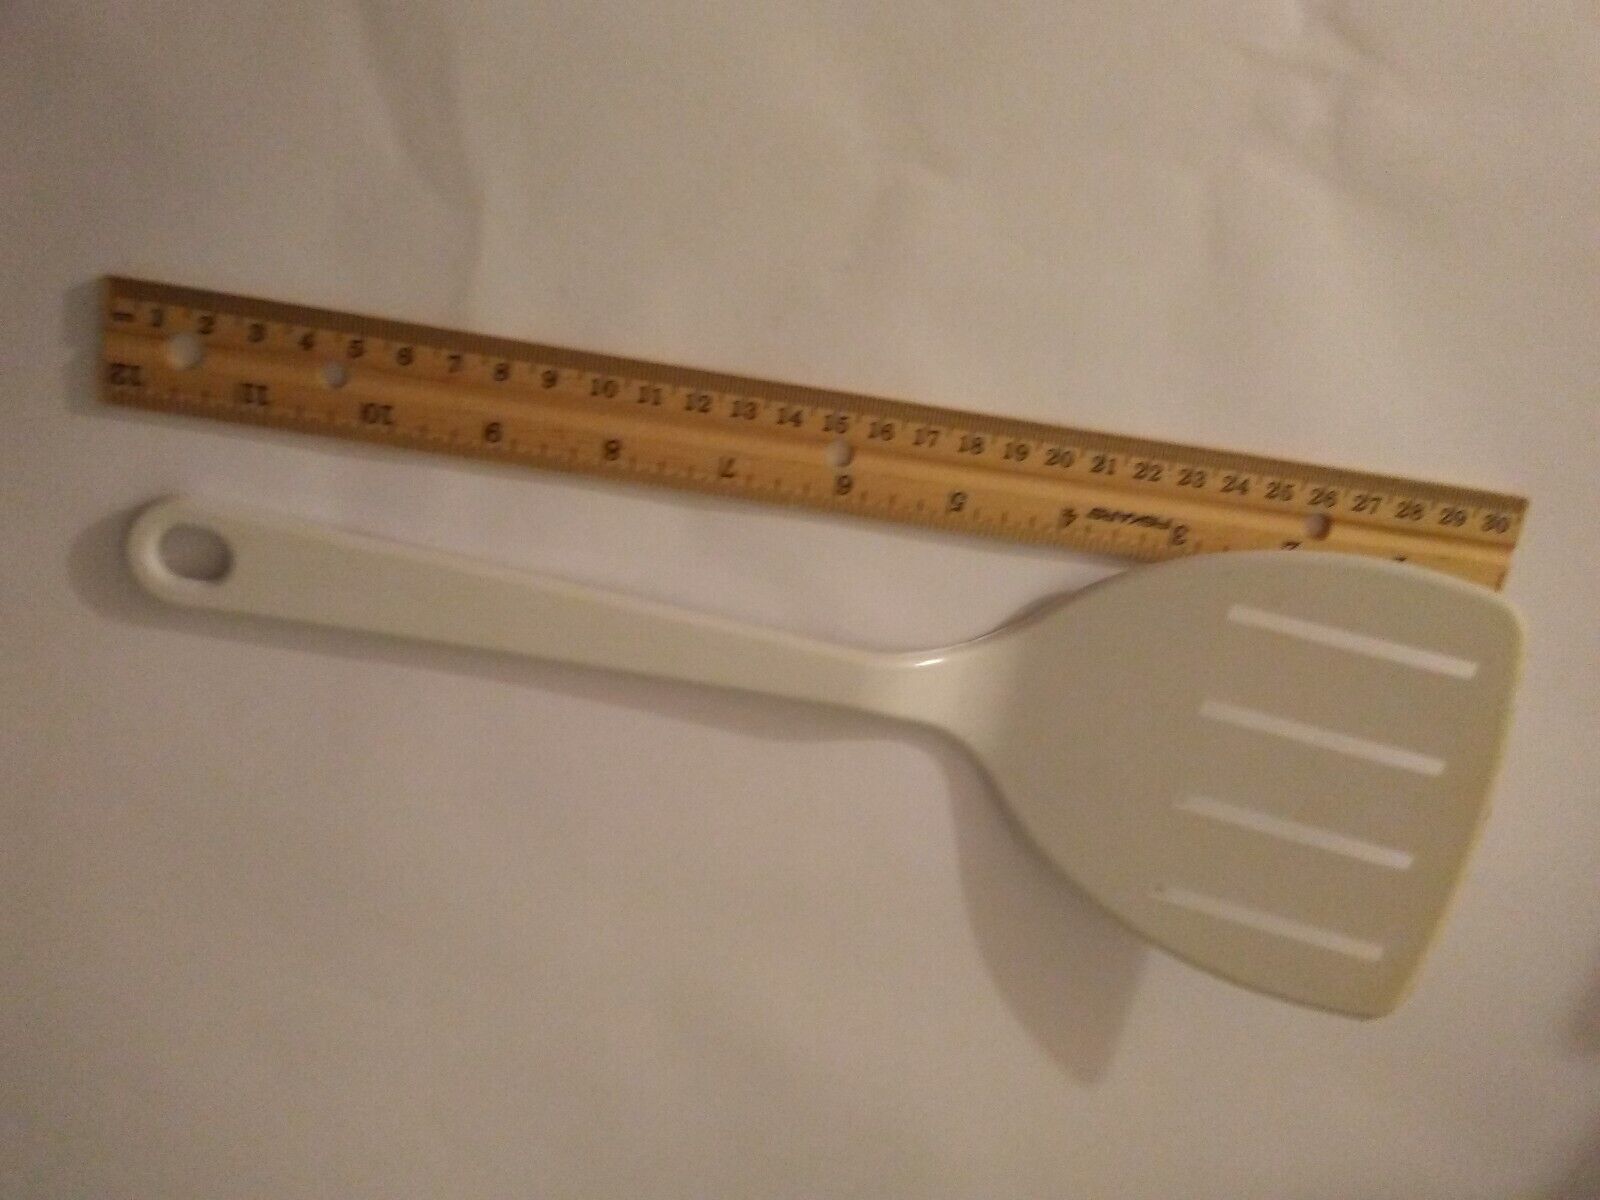 Tailor Made Products white spatula - $18.99